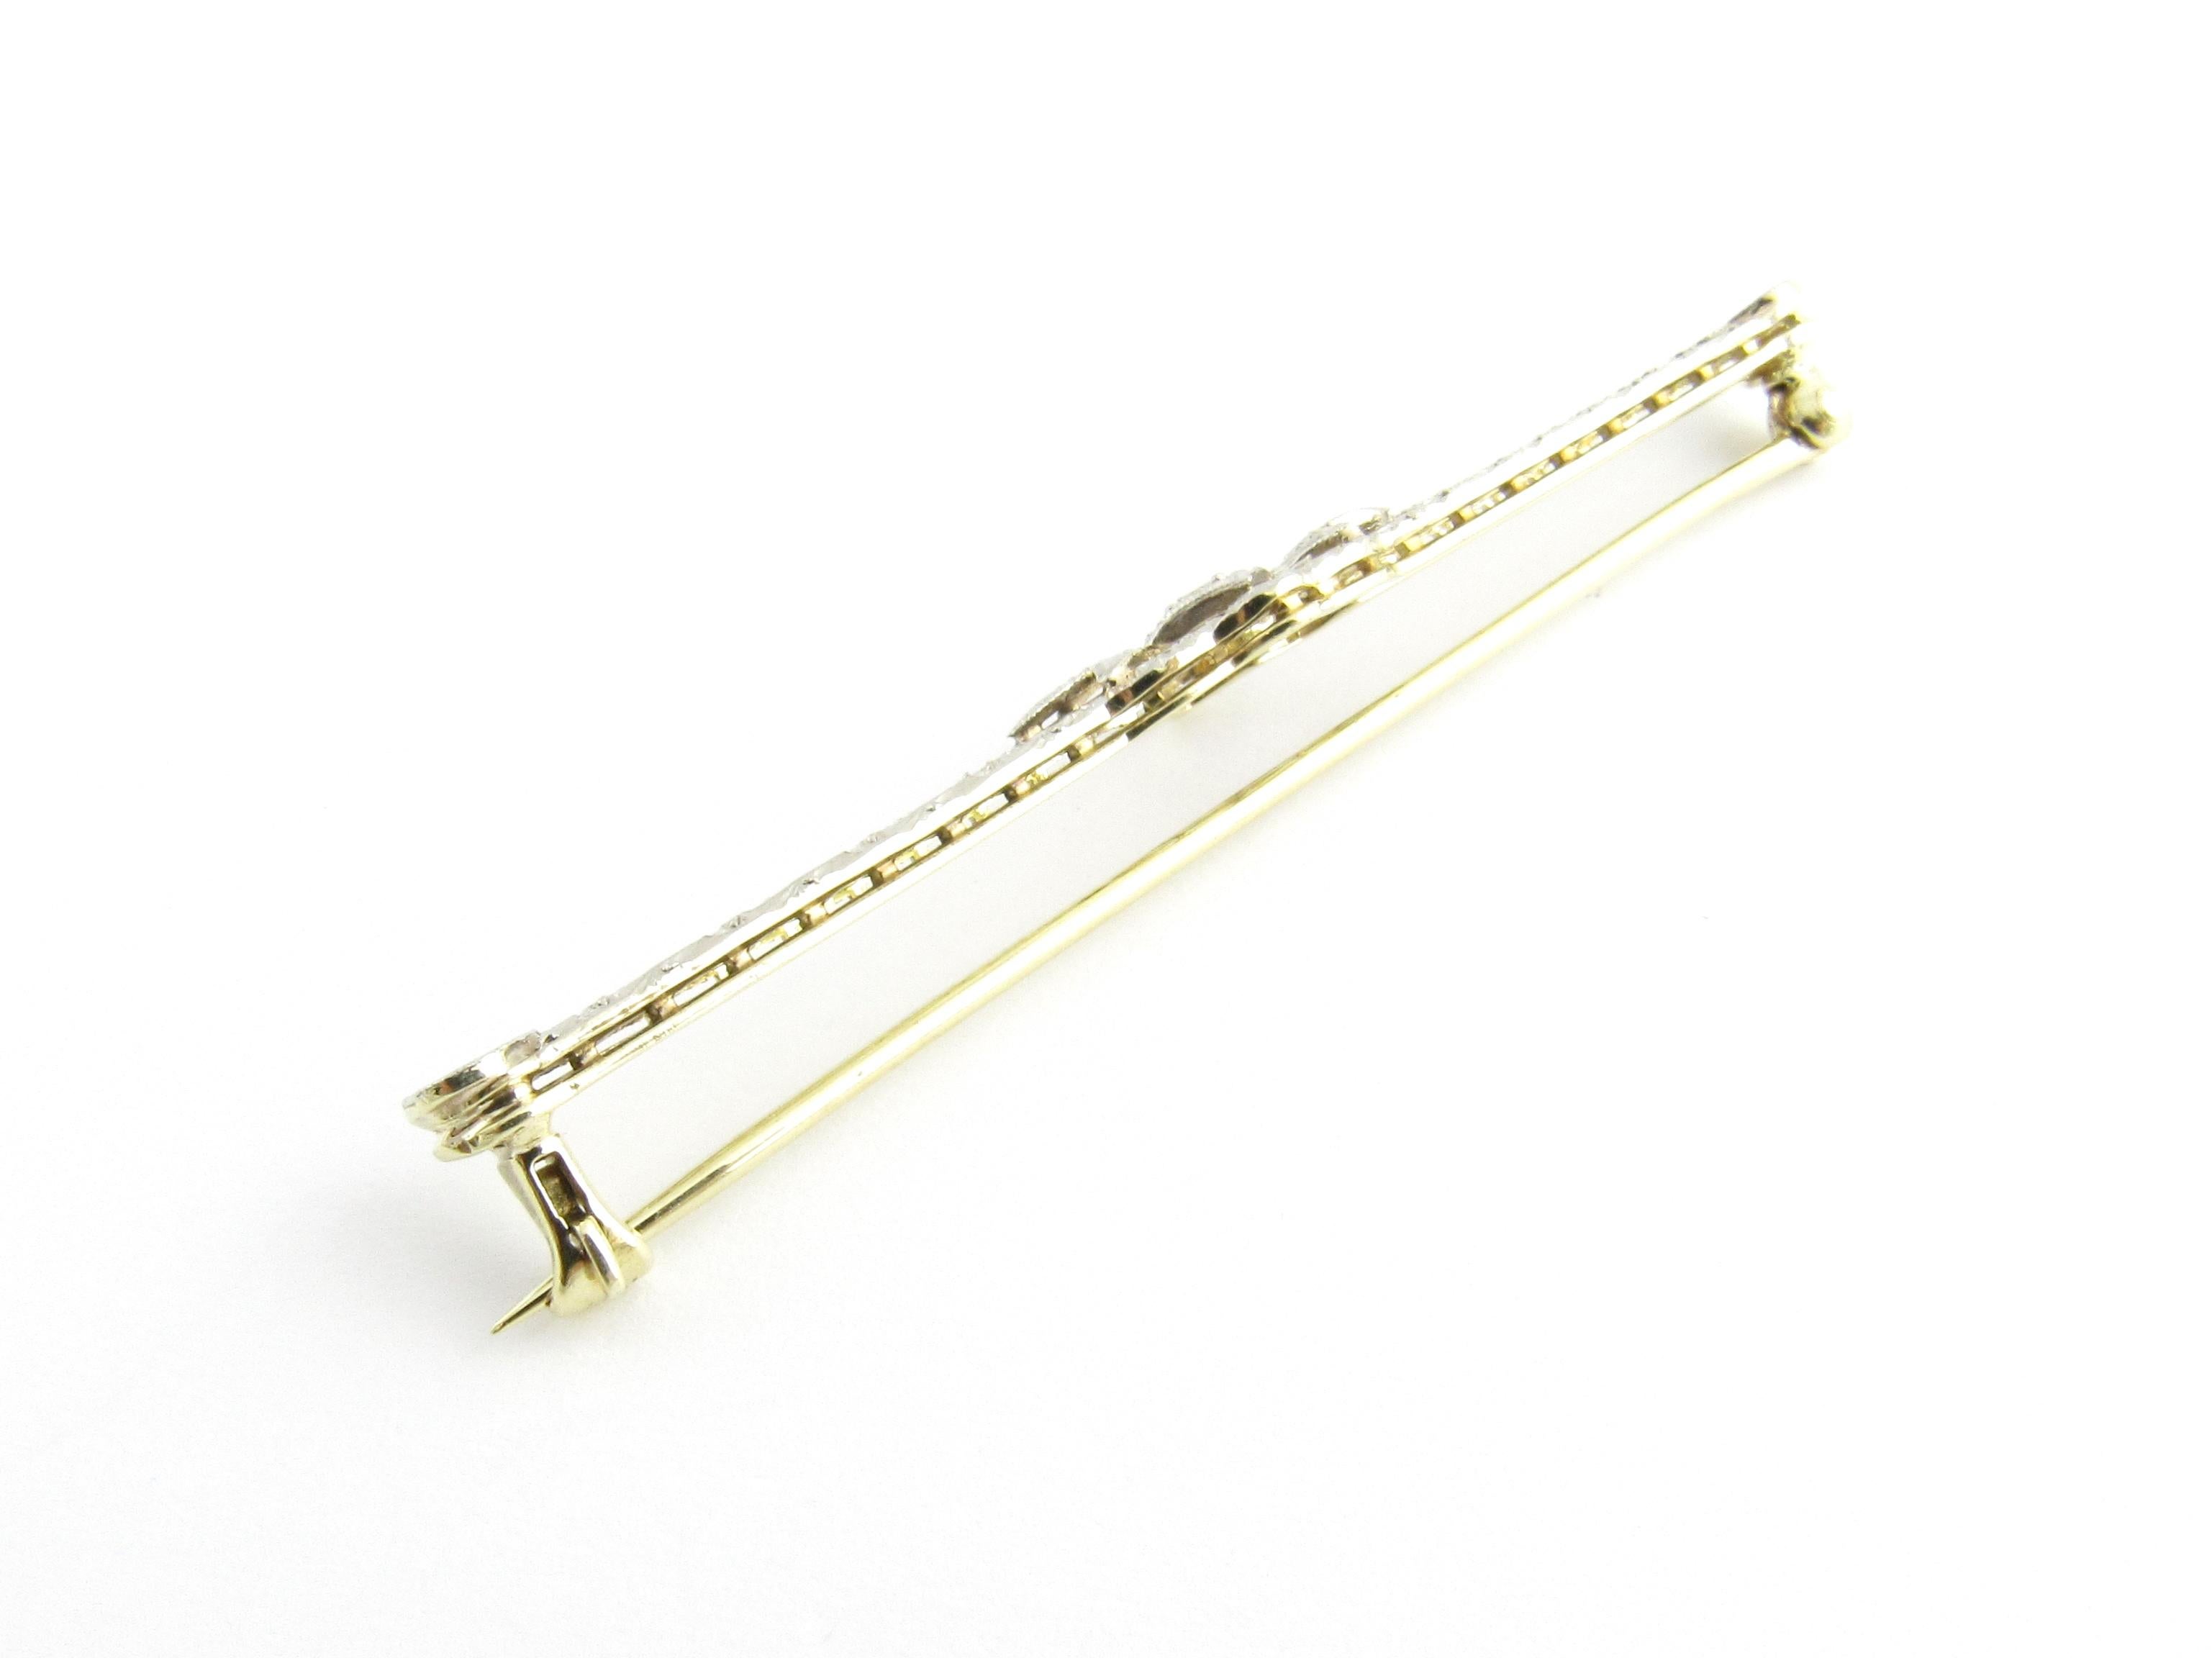 Vintage 14 Karat White and Yellow Gold and Diamond Bar Pin

This lovely bar pin features one round brilliant cut diamond set in beautifully detailed 14K white and yellow gold filigree.

Approximate total diamond weight: .03 ct.

Diamond clarity: